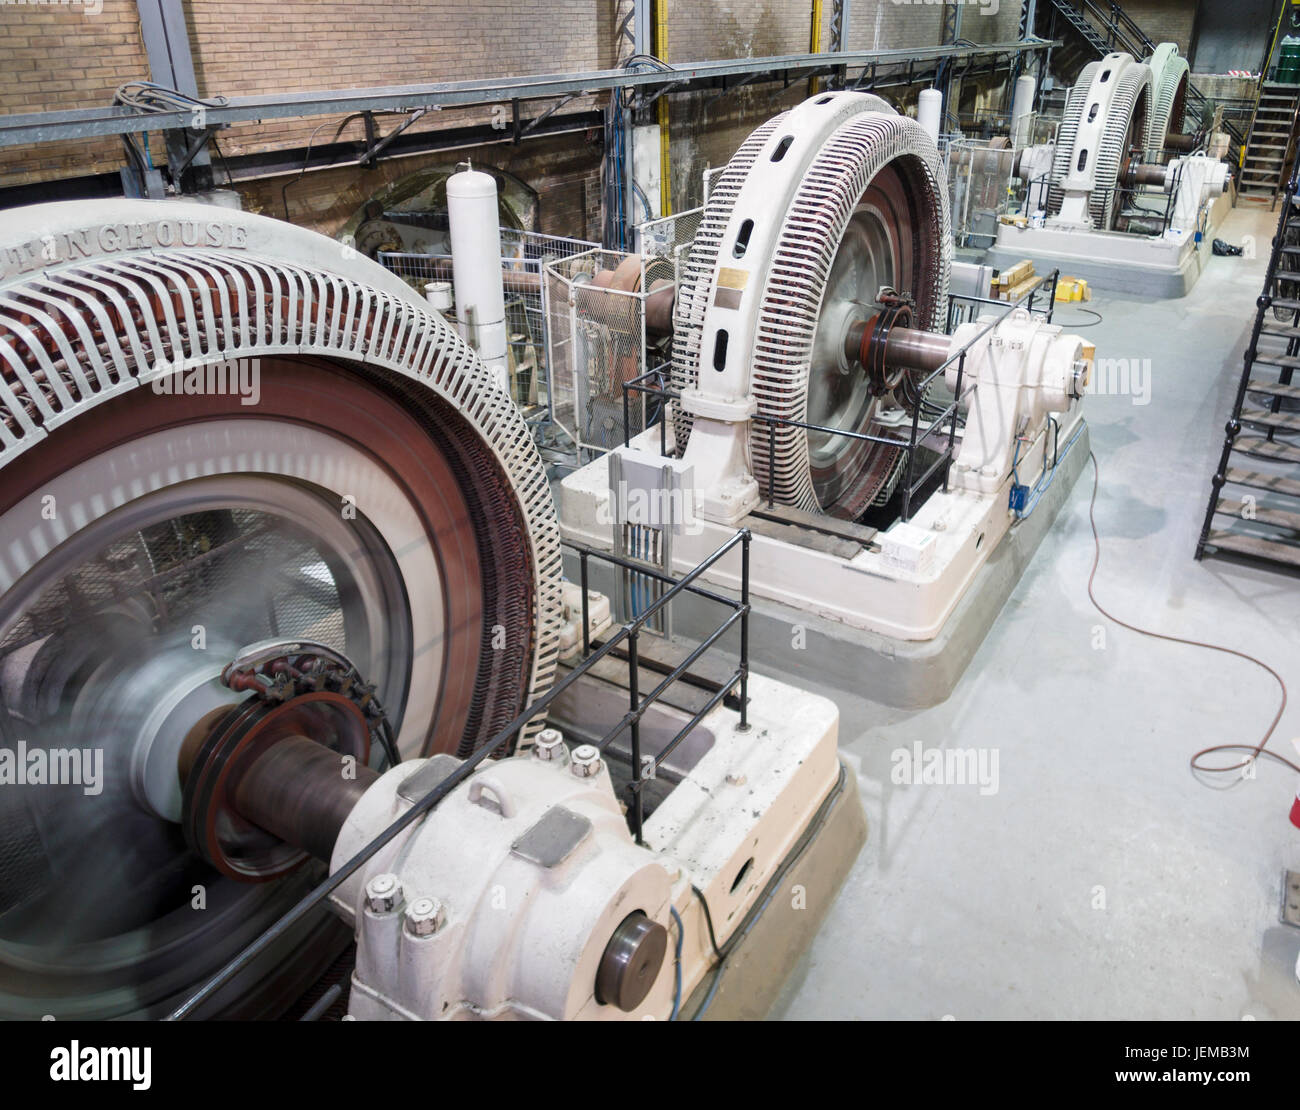 Four Spinning Hydro Electric Turbines: A row of four small old Stock Photo: 146735896 ...1300 x 1110